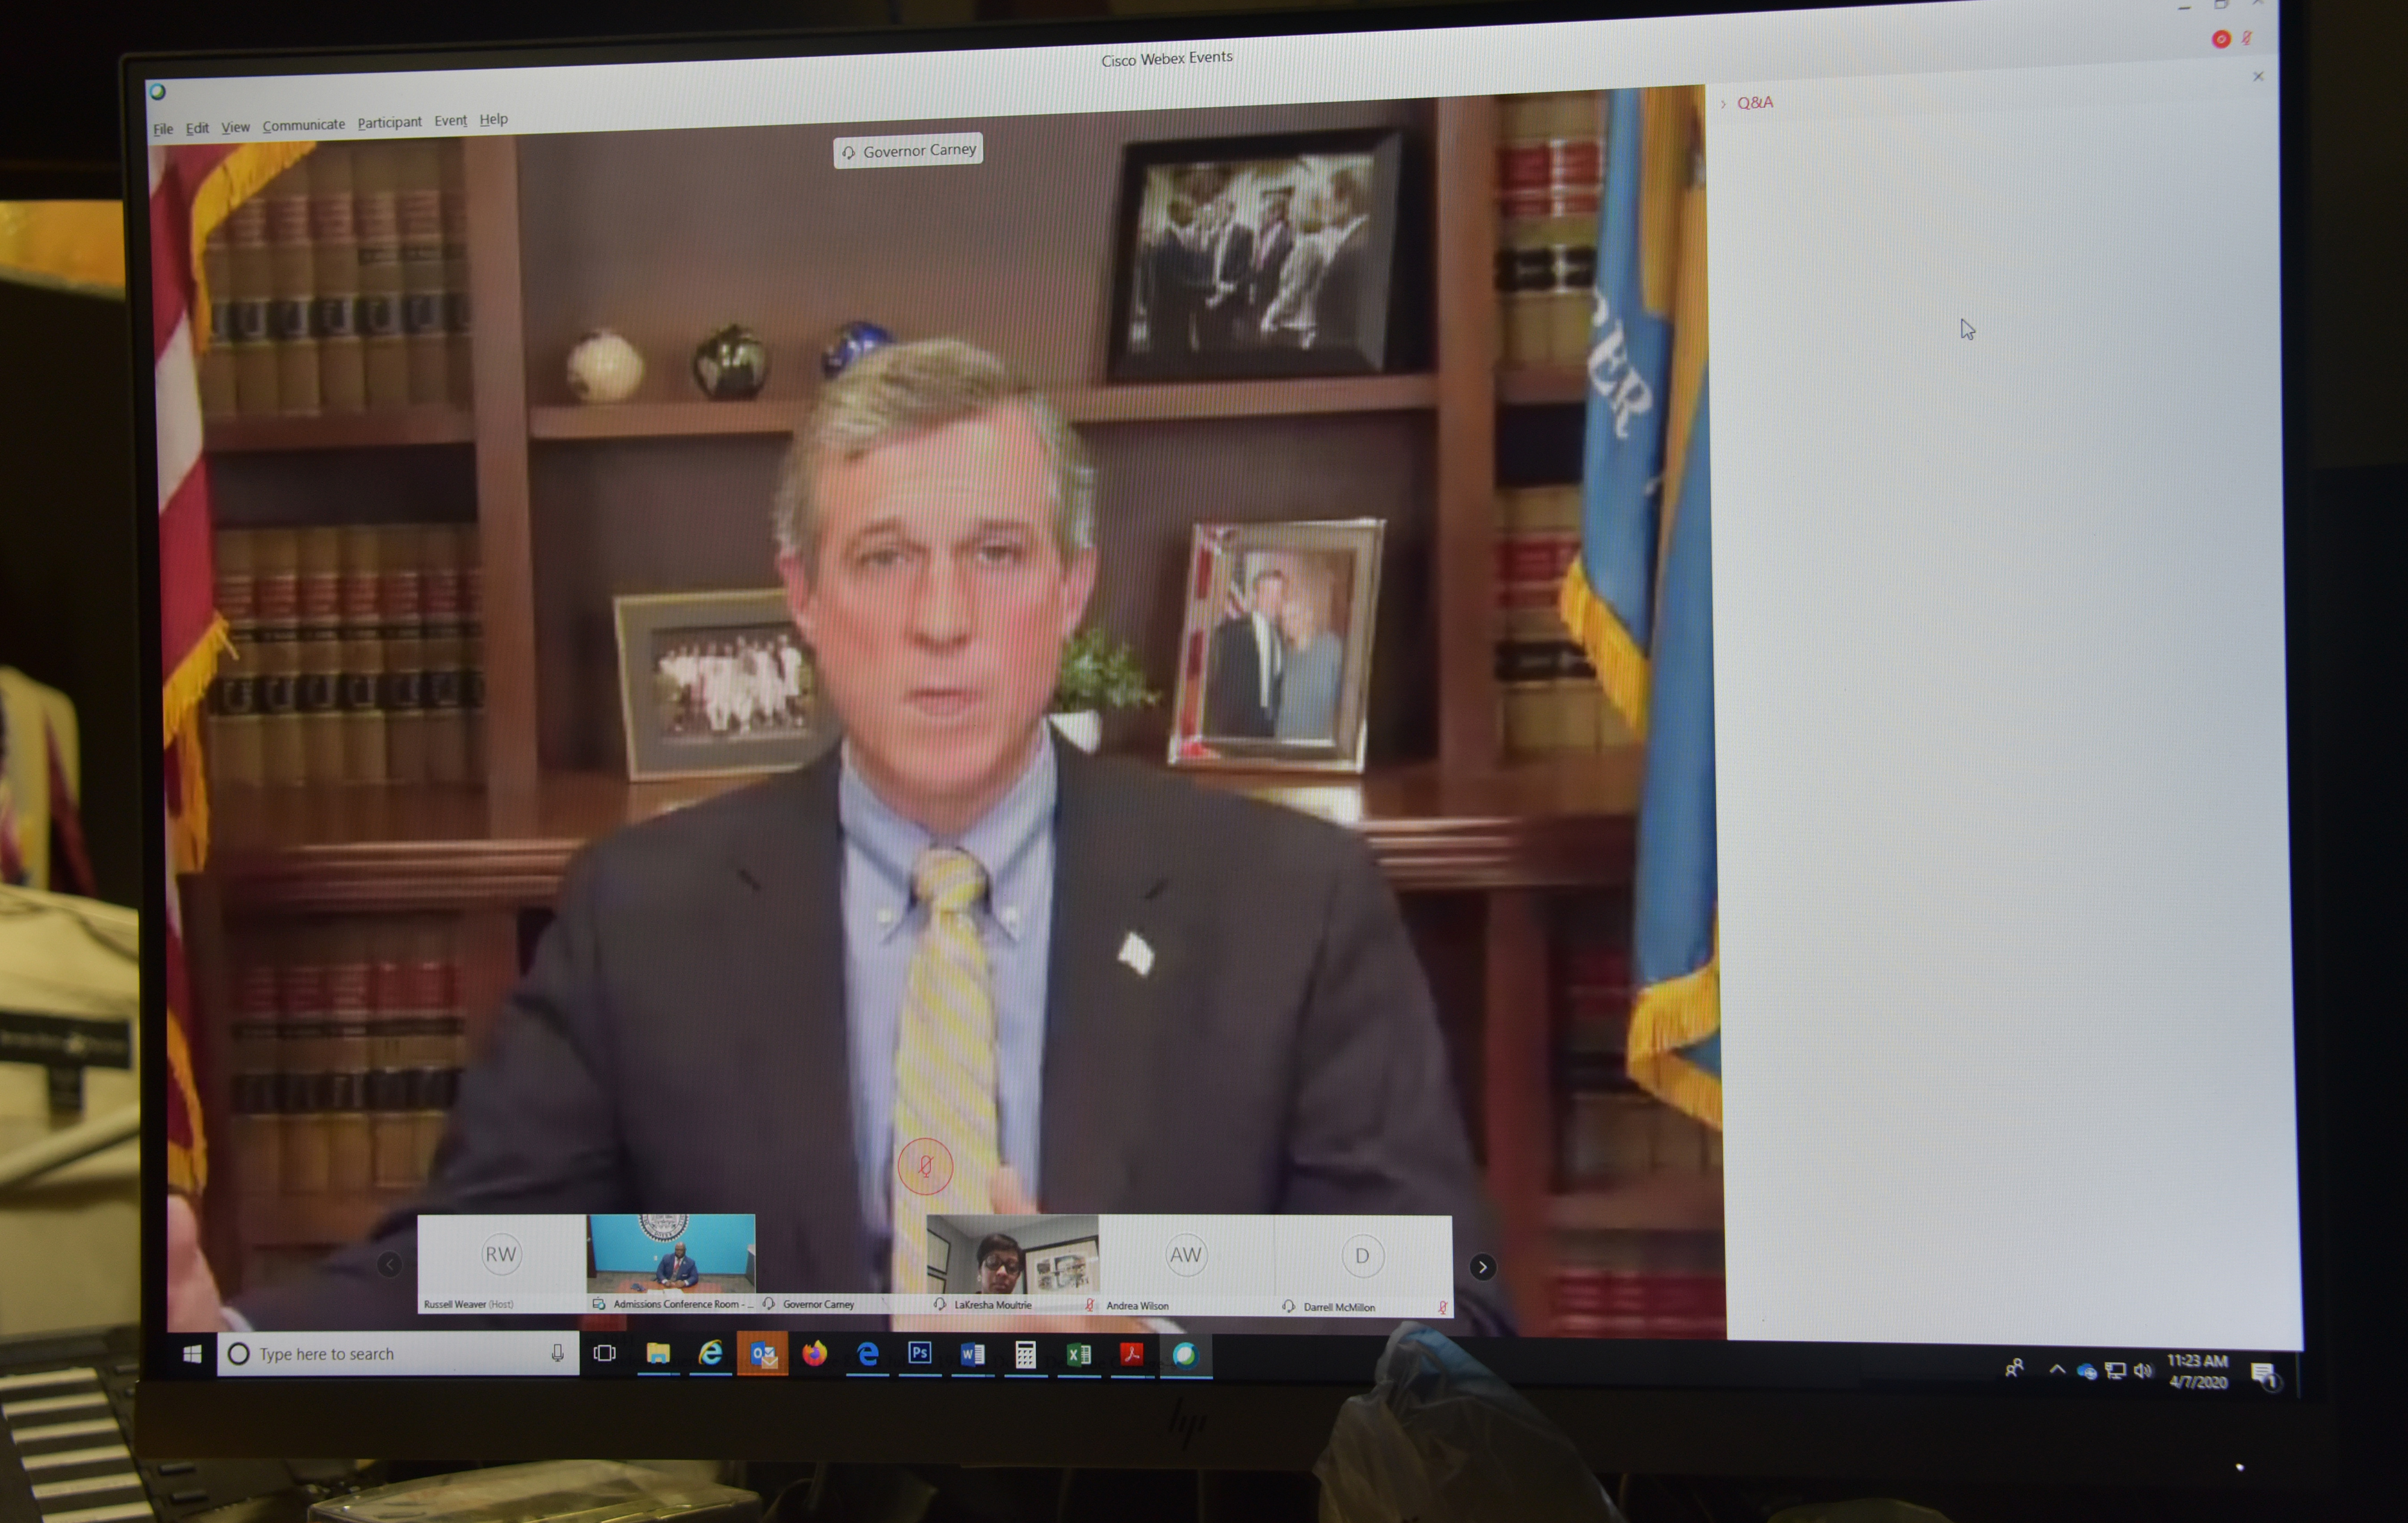 Delaware Gov. John Carney discussed the current COVID-19 situation in Delaware with University President Tony Allen during the April 7 Webex